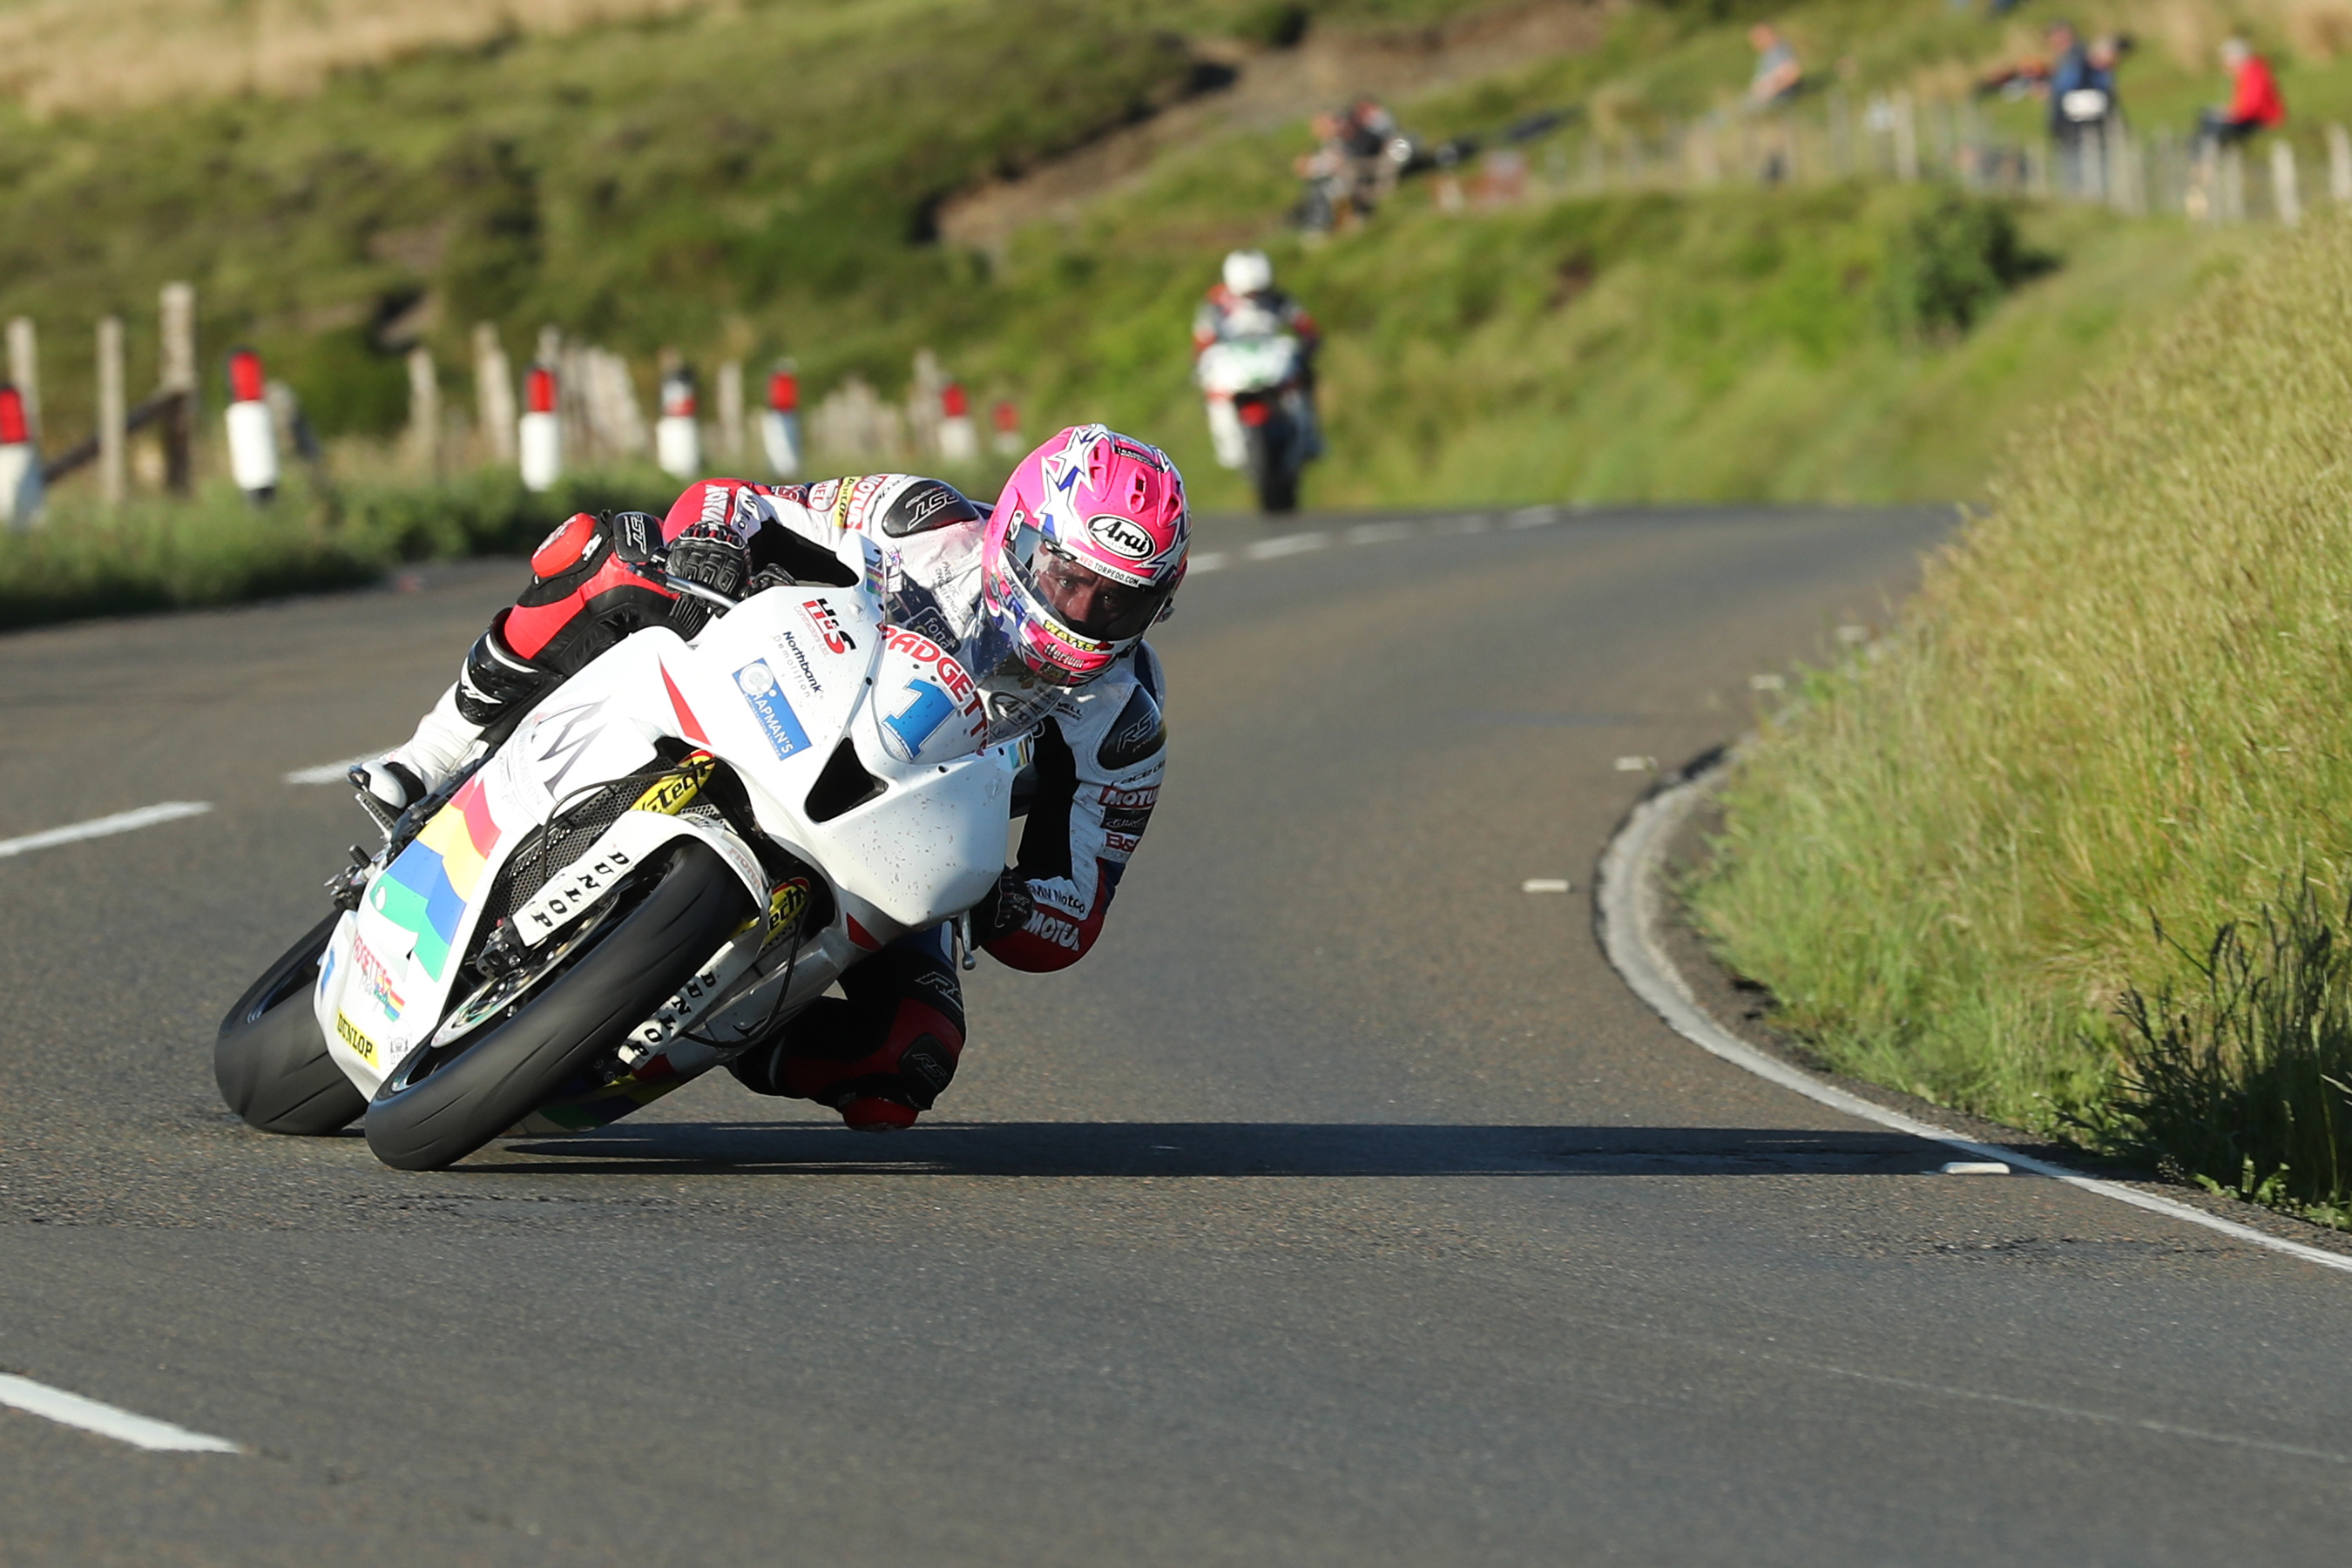 Lee Johnston confirms he is fit and ready for the Ulster after TT crash